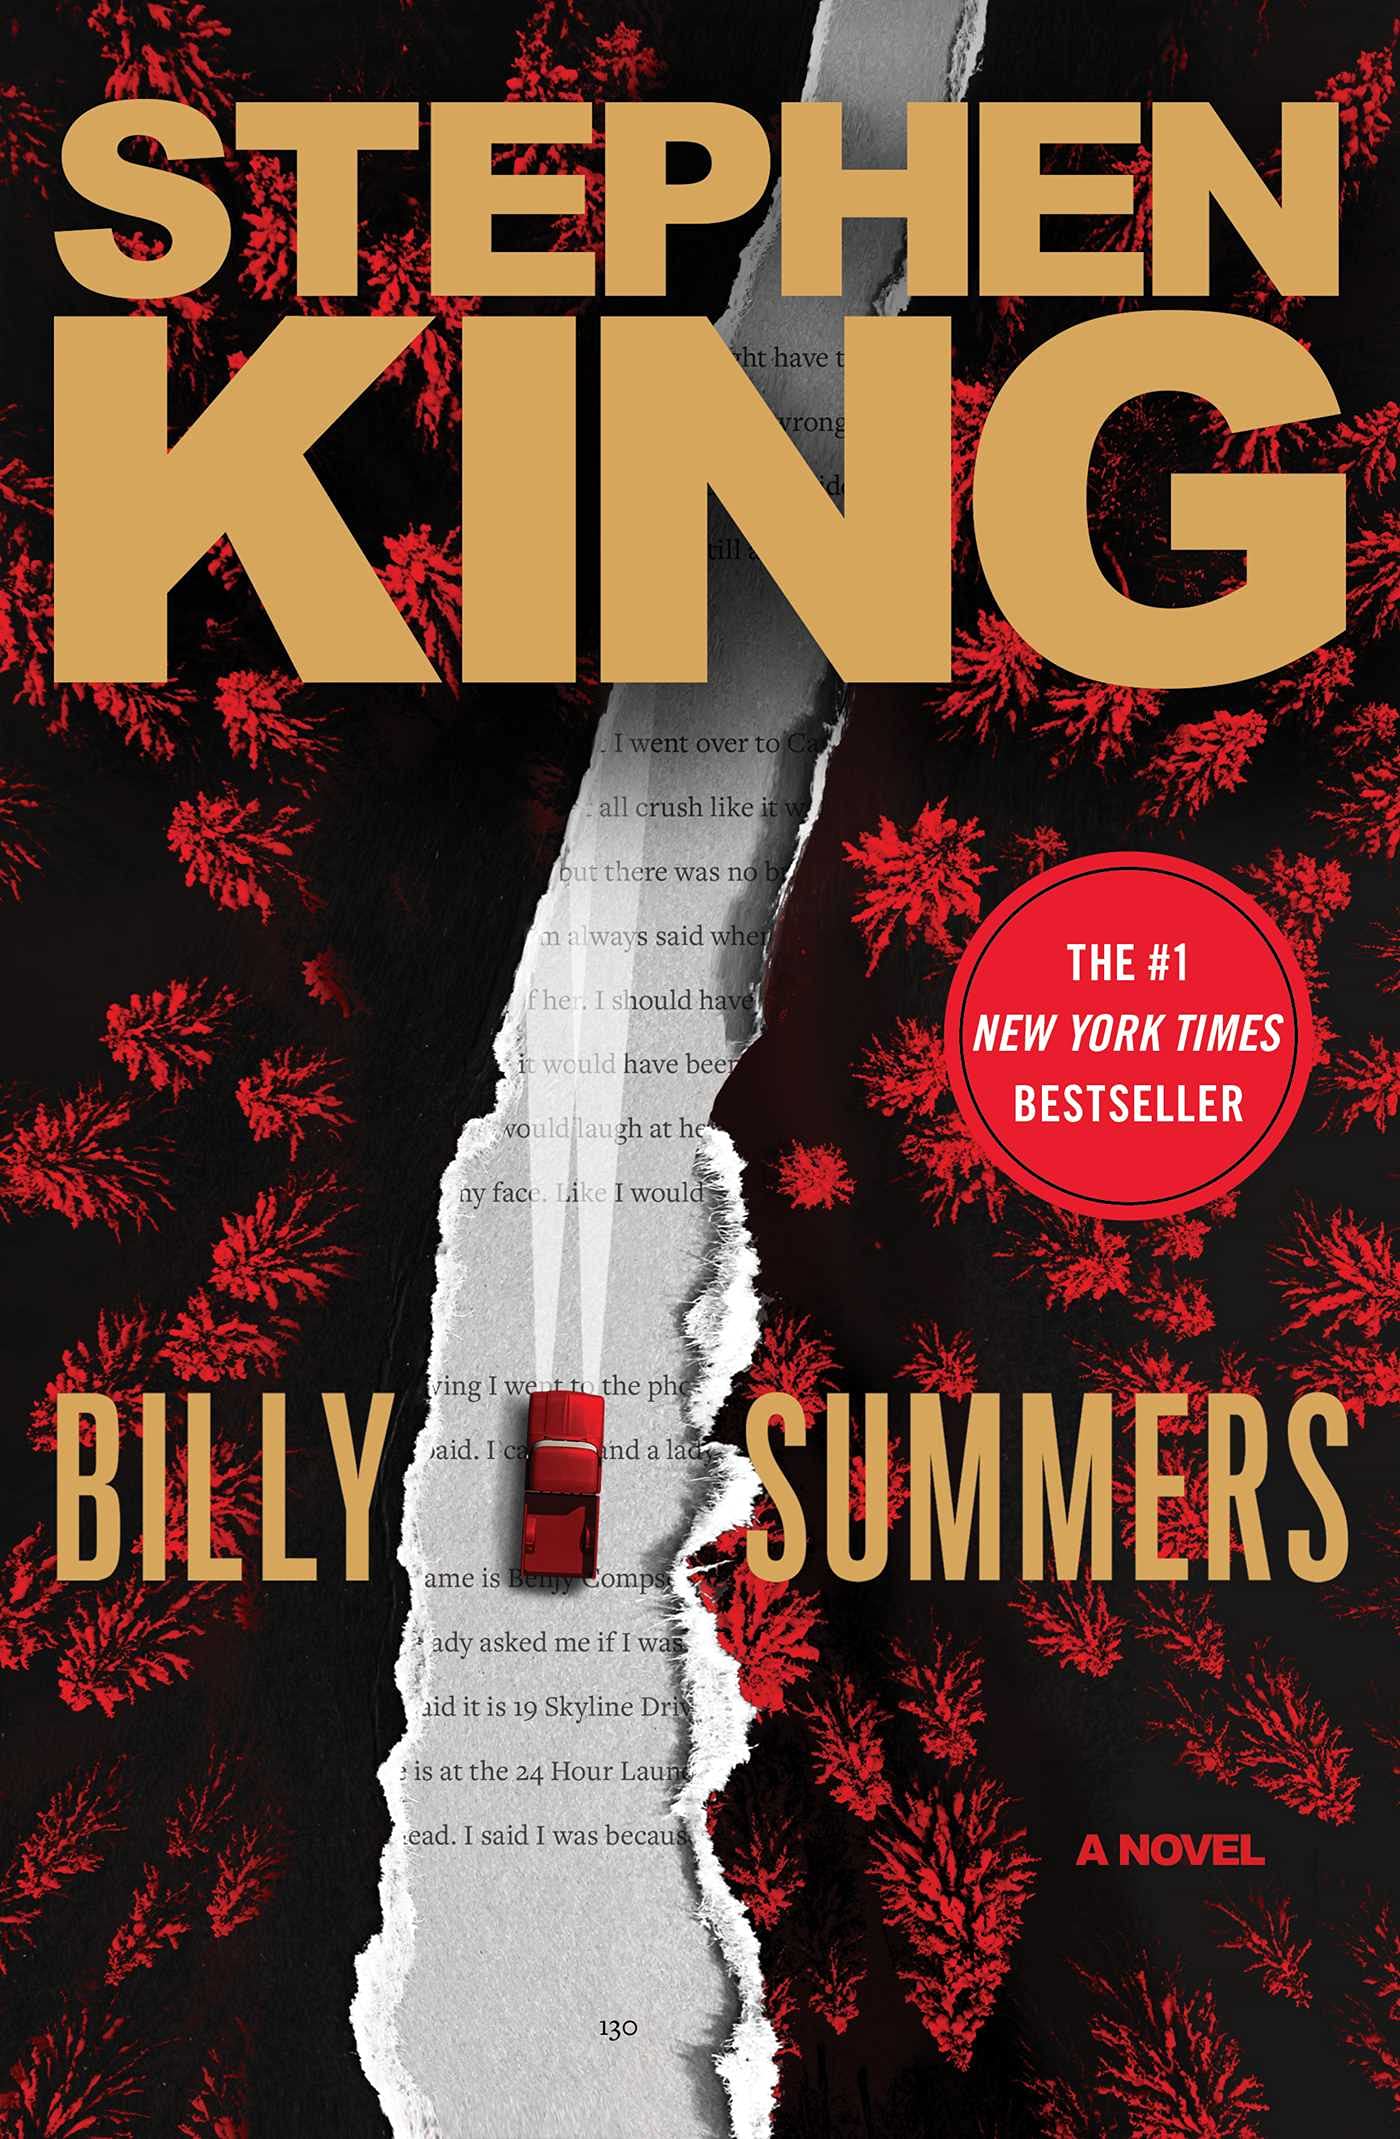 Warner Bros. Acquires Rights to Stephen King's 'Billy Summers'